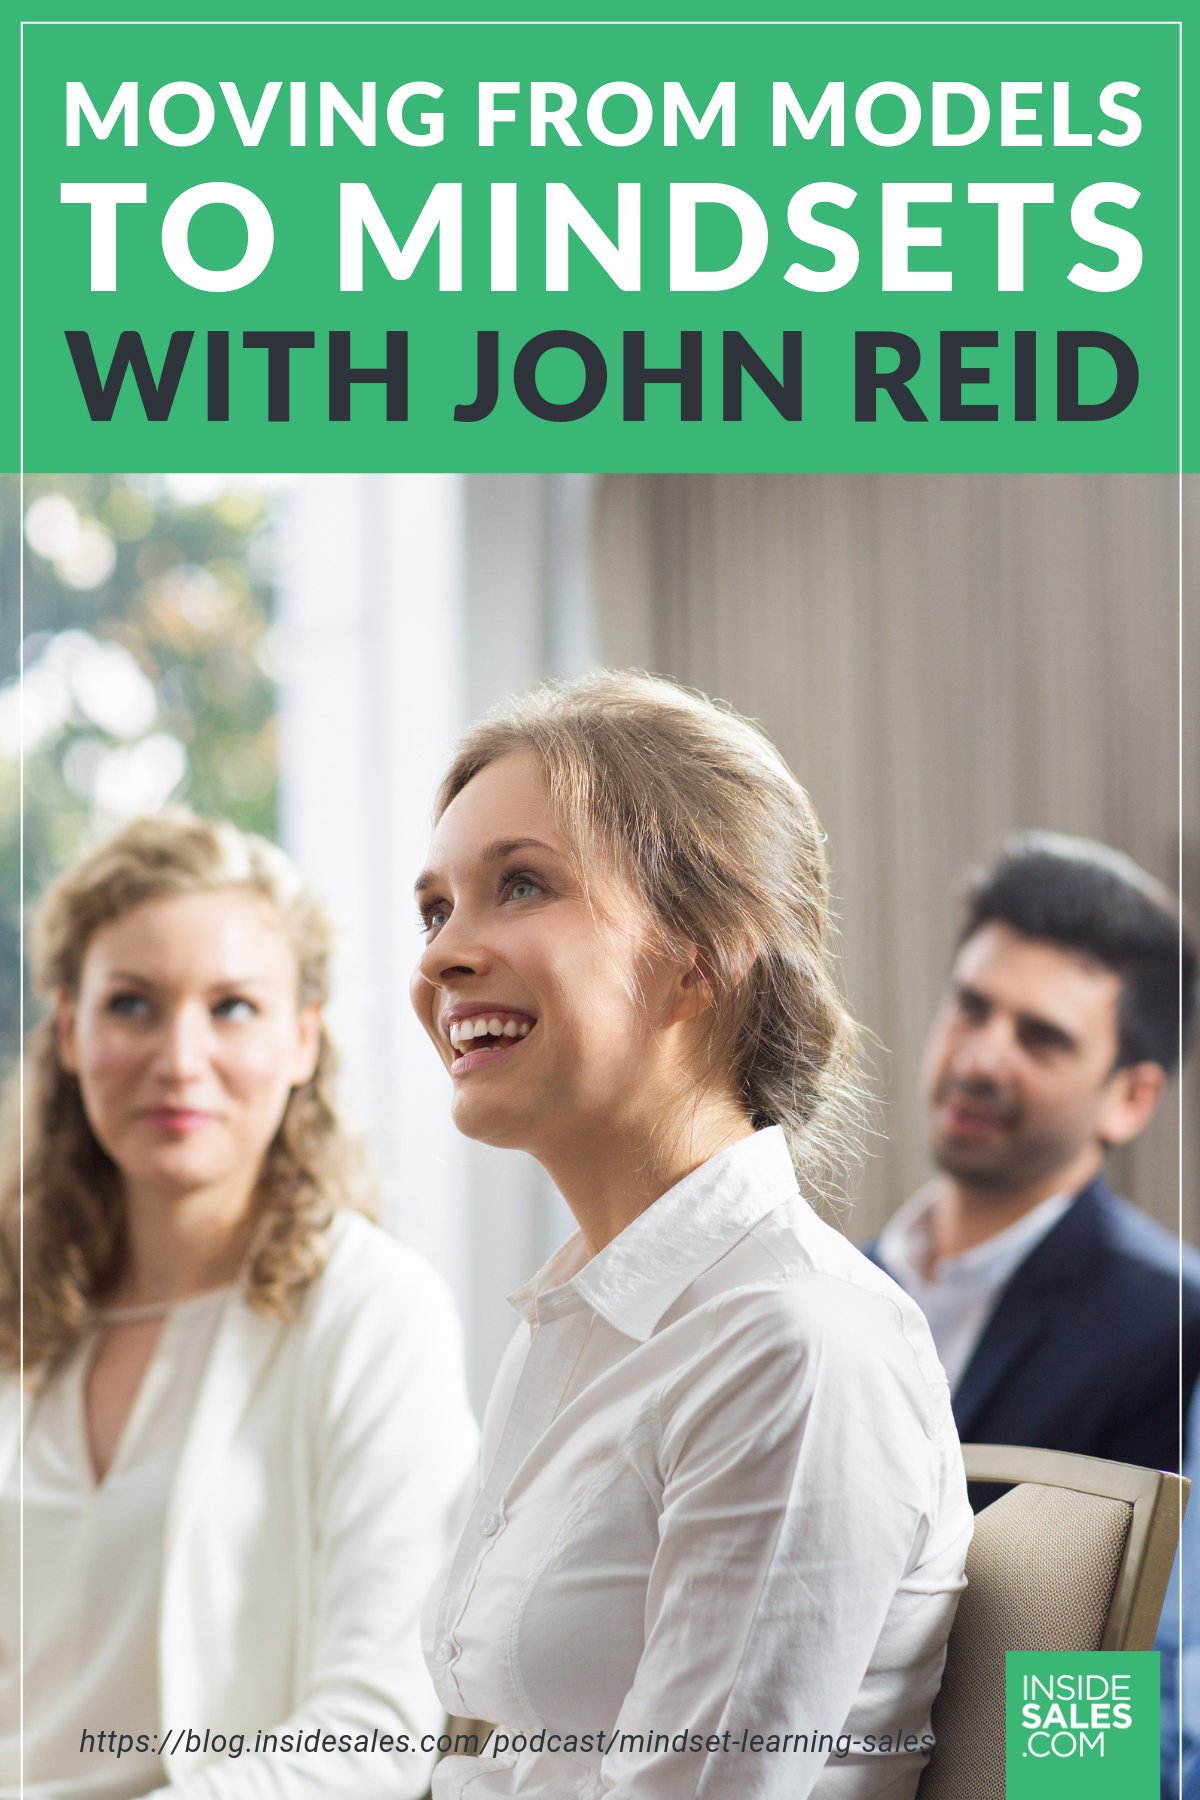 Moving From Models To Mindsets With John Reid https://resources.insidesales.com/blog/podcast/mindset-learning-sales/